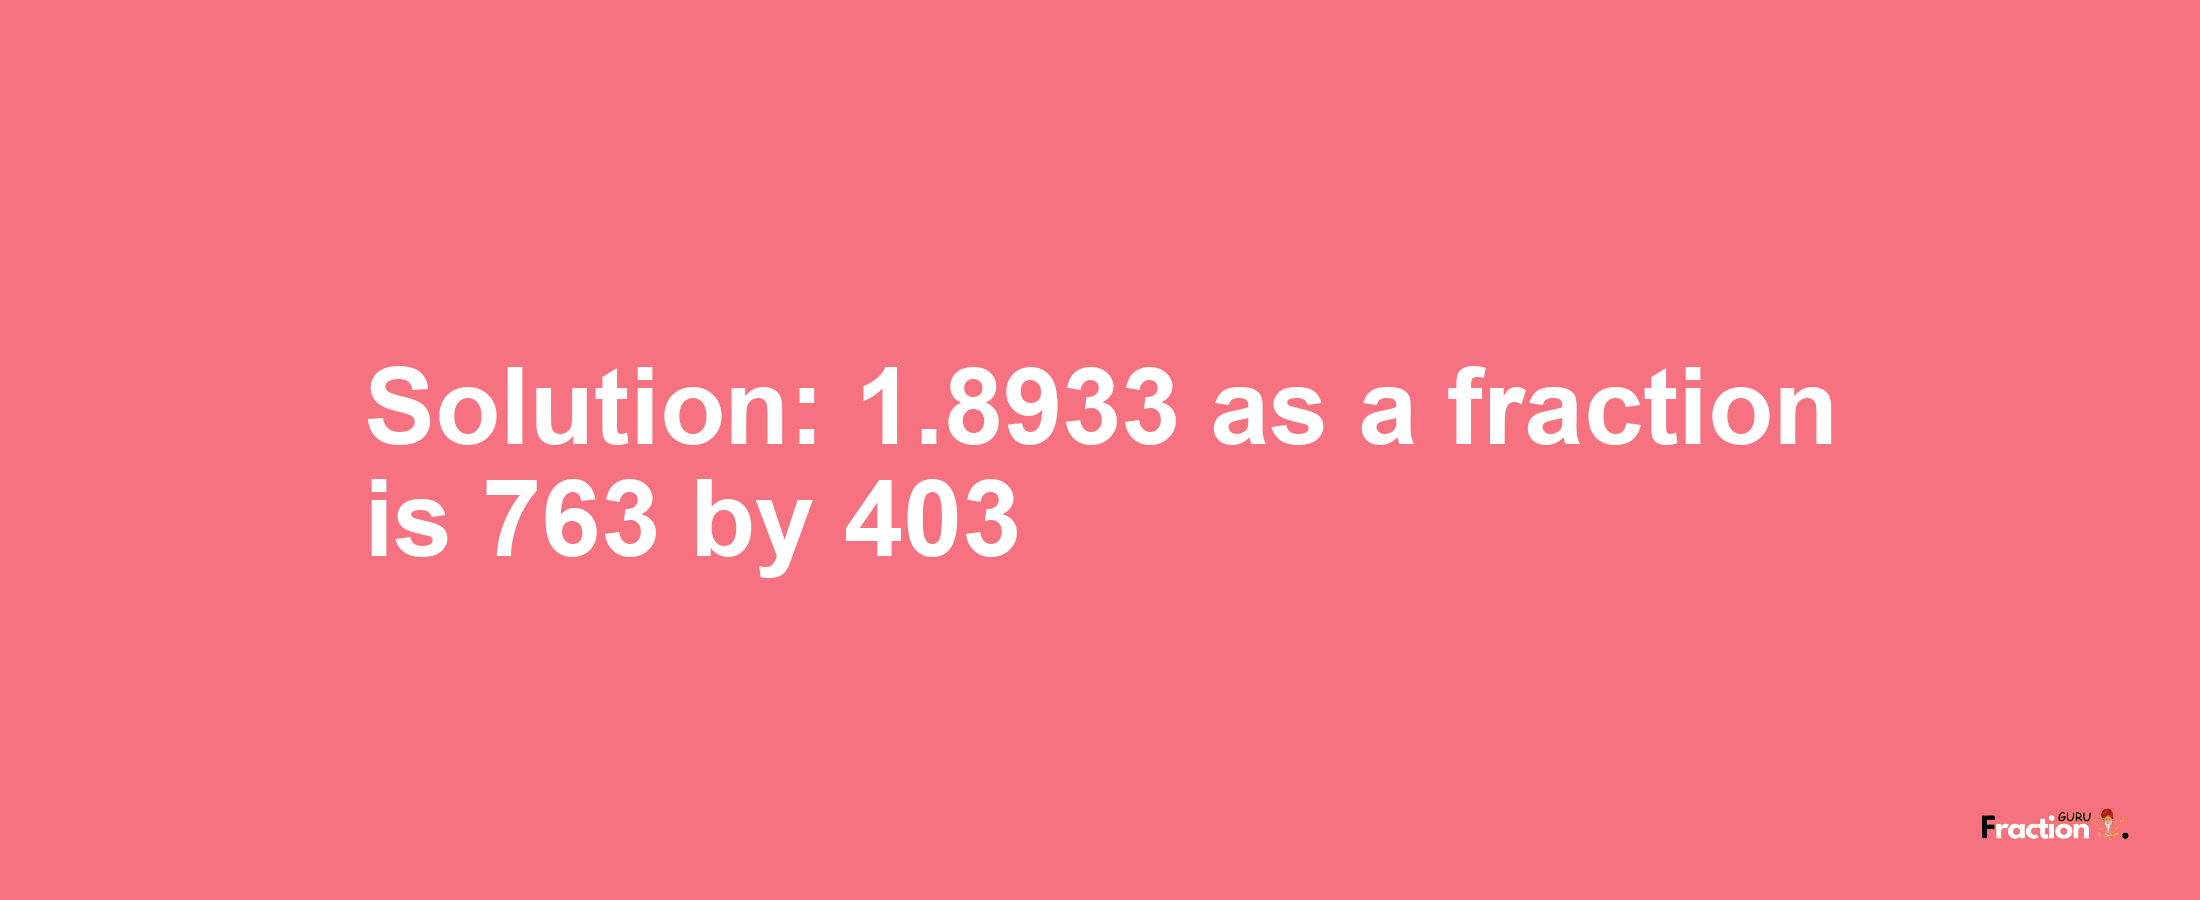 Solution:1.8933 as a fraction is 763/403